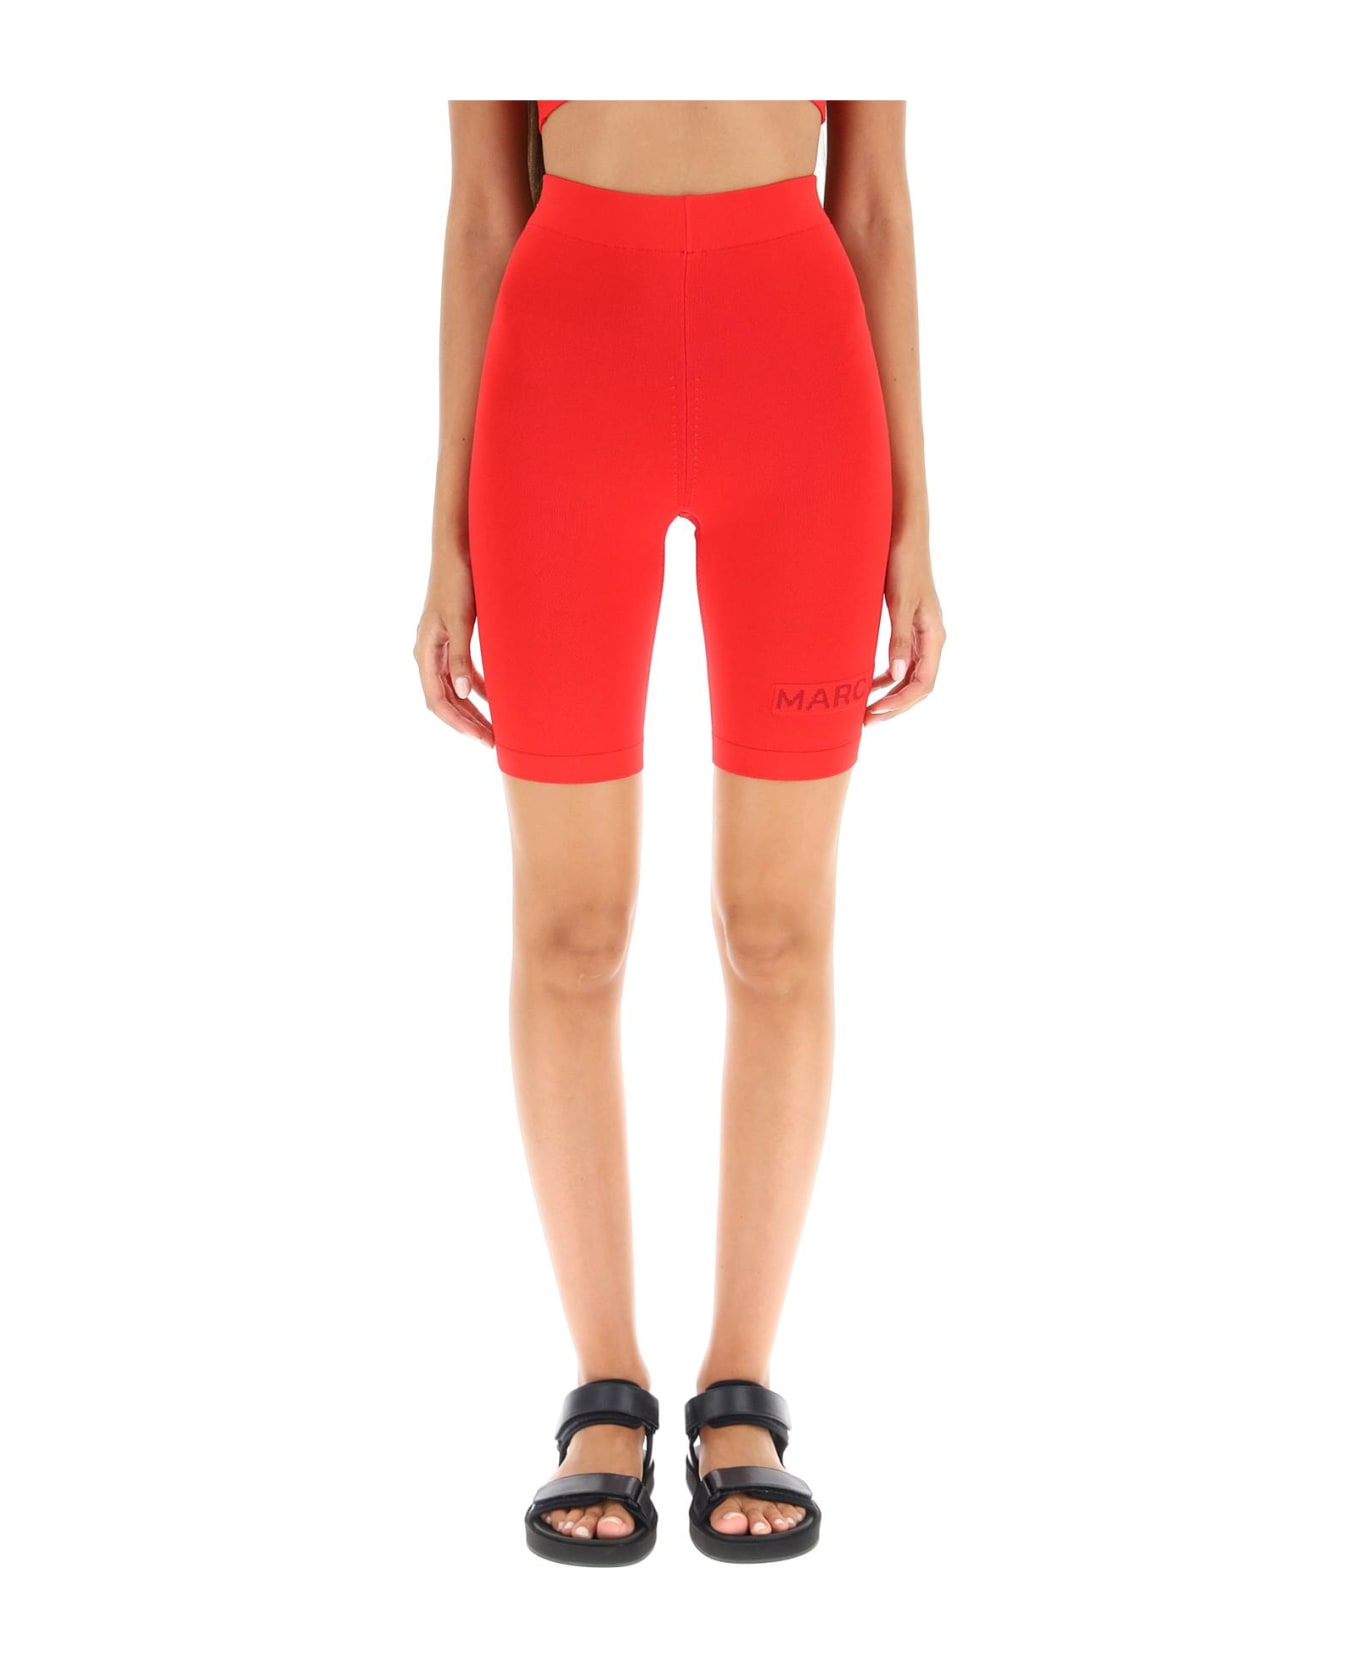 Marc Jacobs Sport Shorts - TRUE RED (Red)